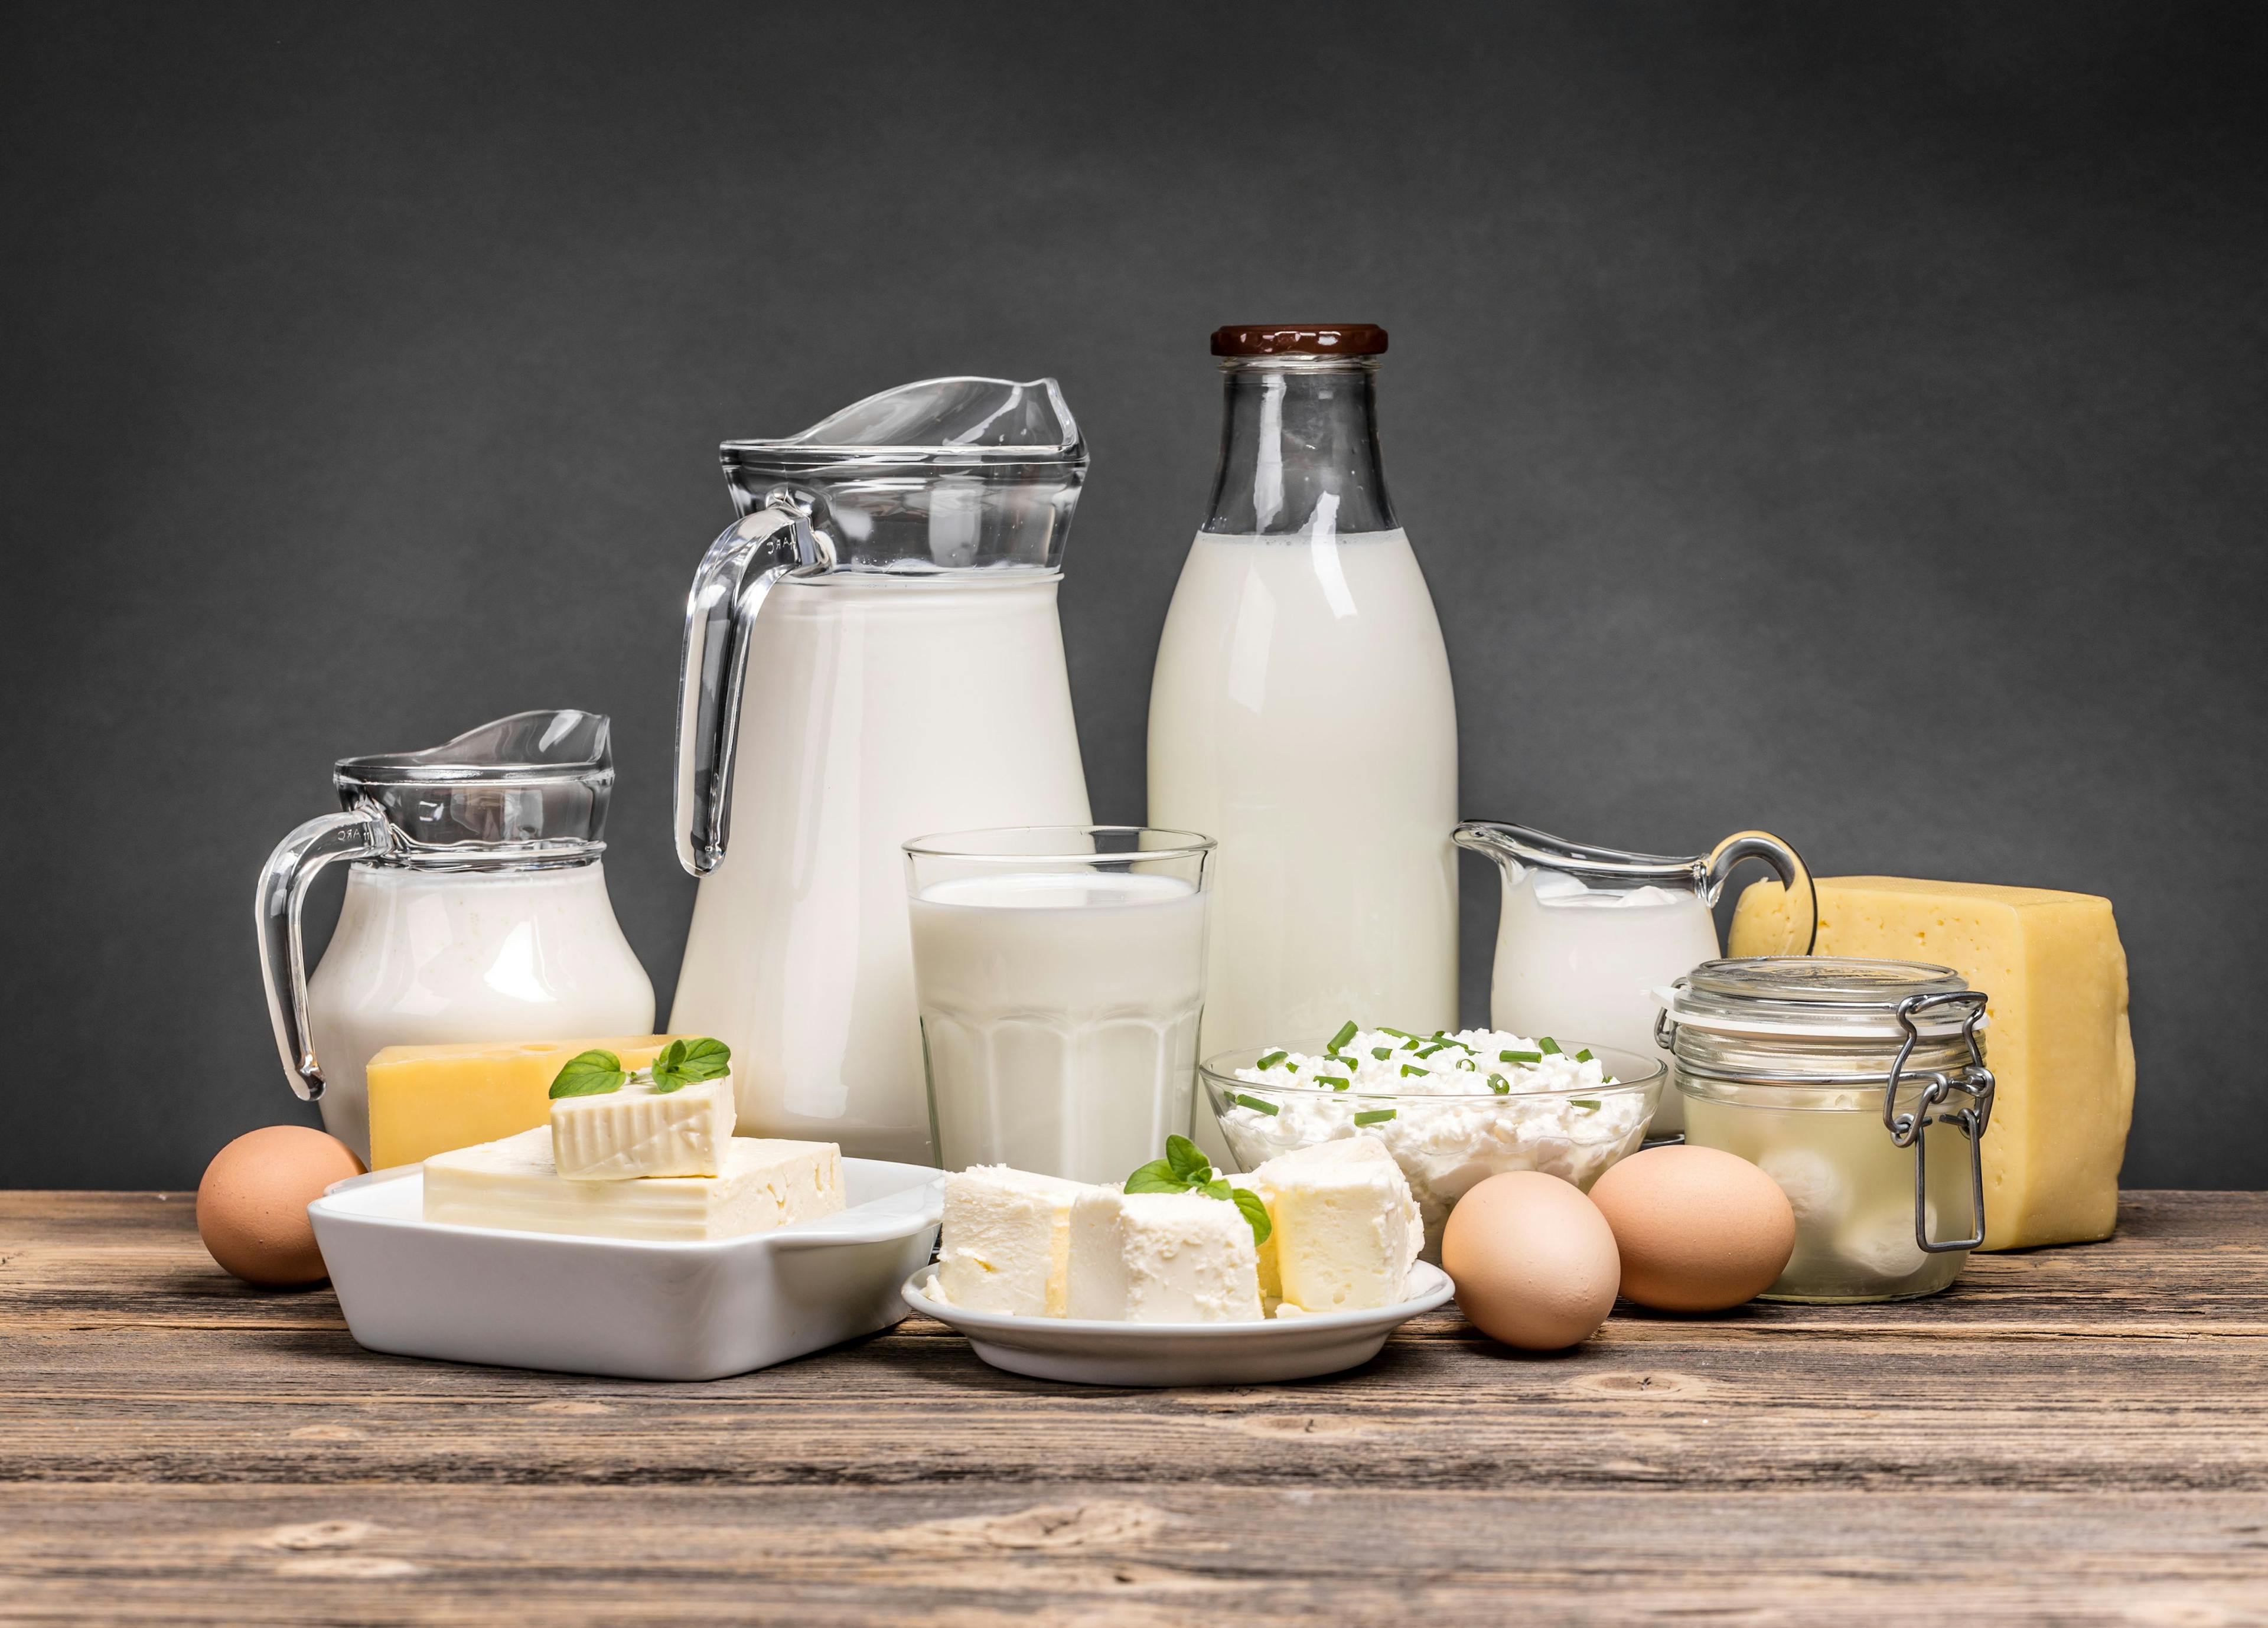 Assortment of dairy products | Image Credit: © Grafvision - stock.adobe.com.